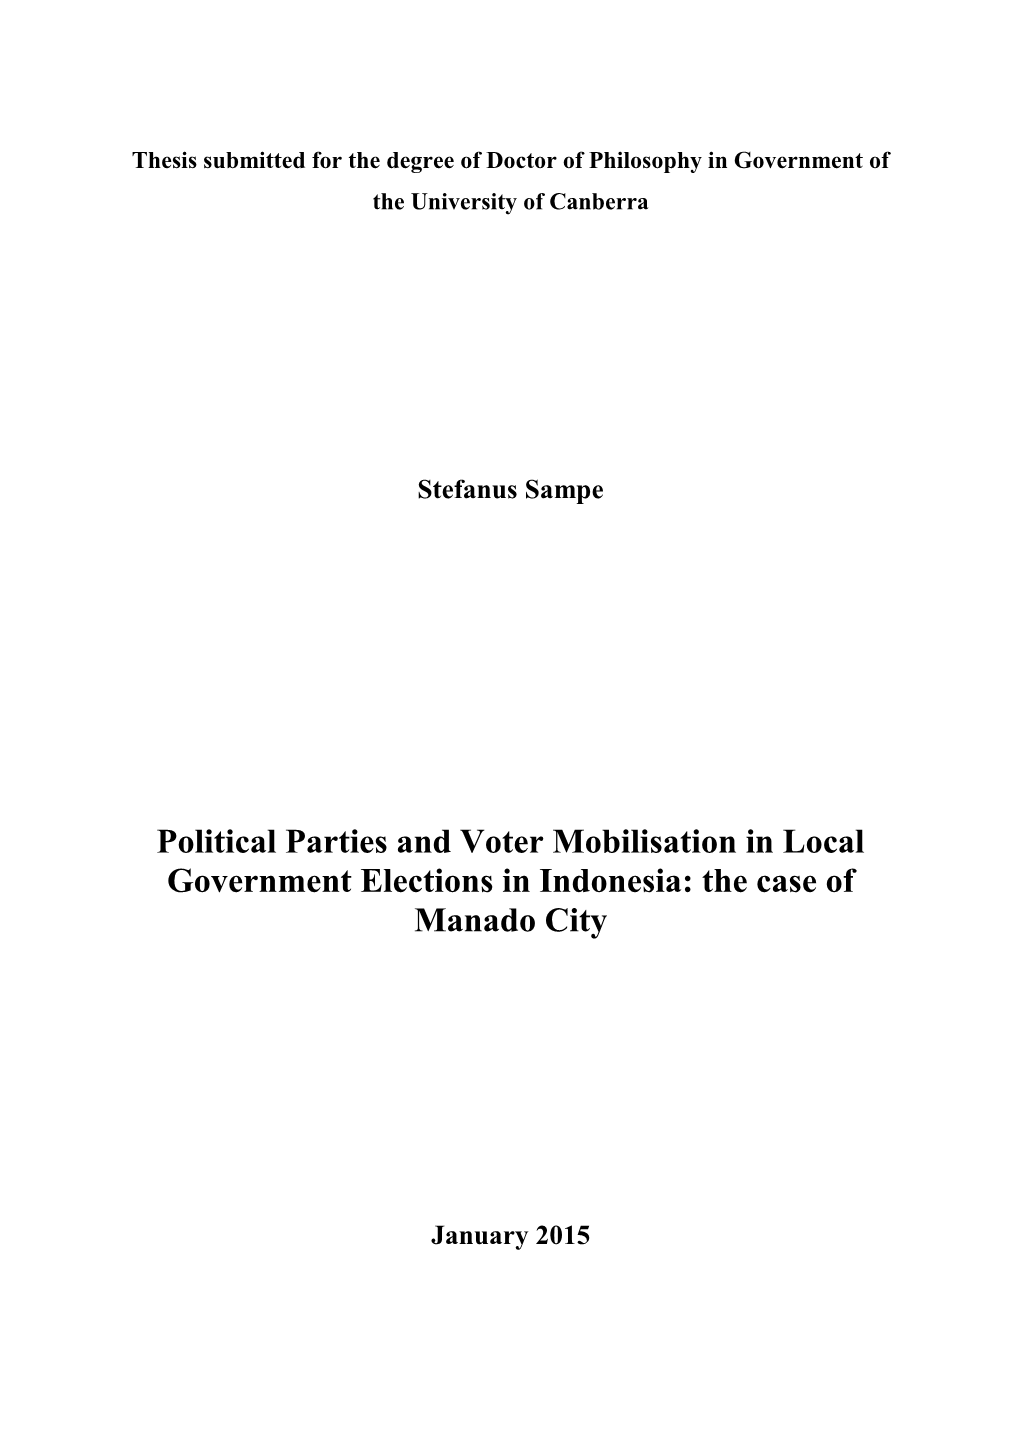 Political Parties and Voter Mobilisation in Local Government Elections in Indonesia: the Case of Manado City